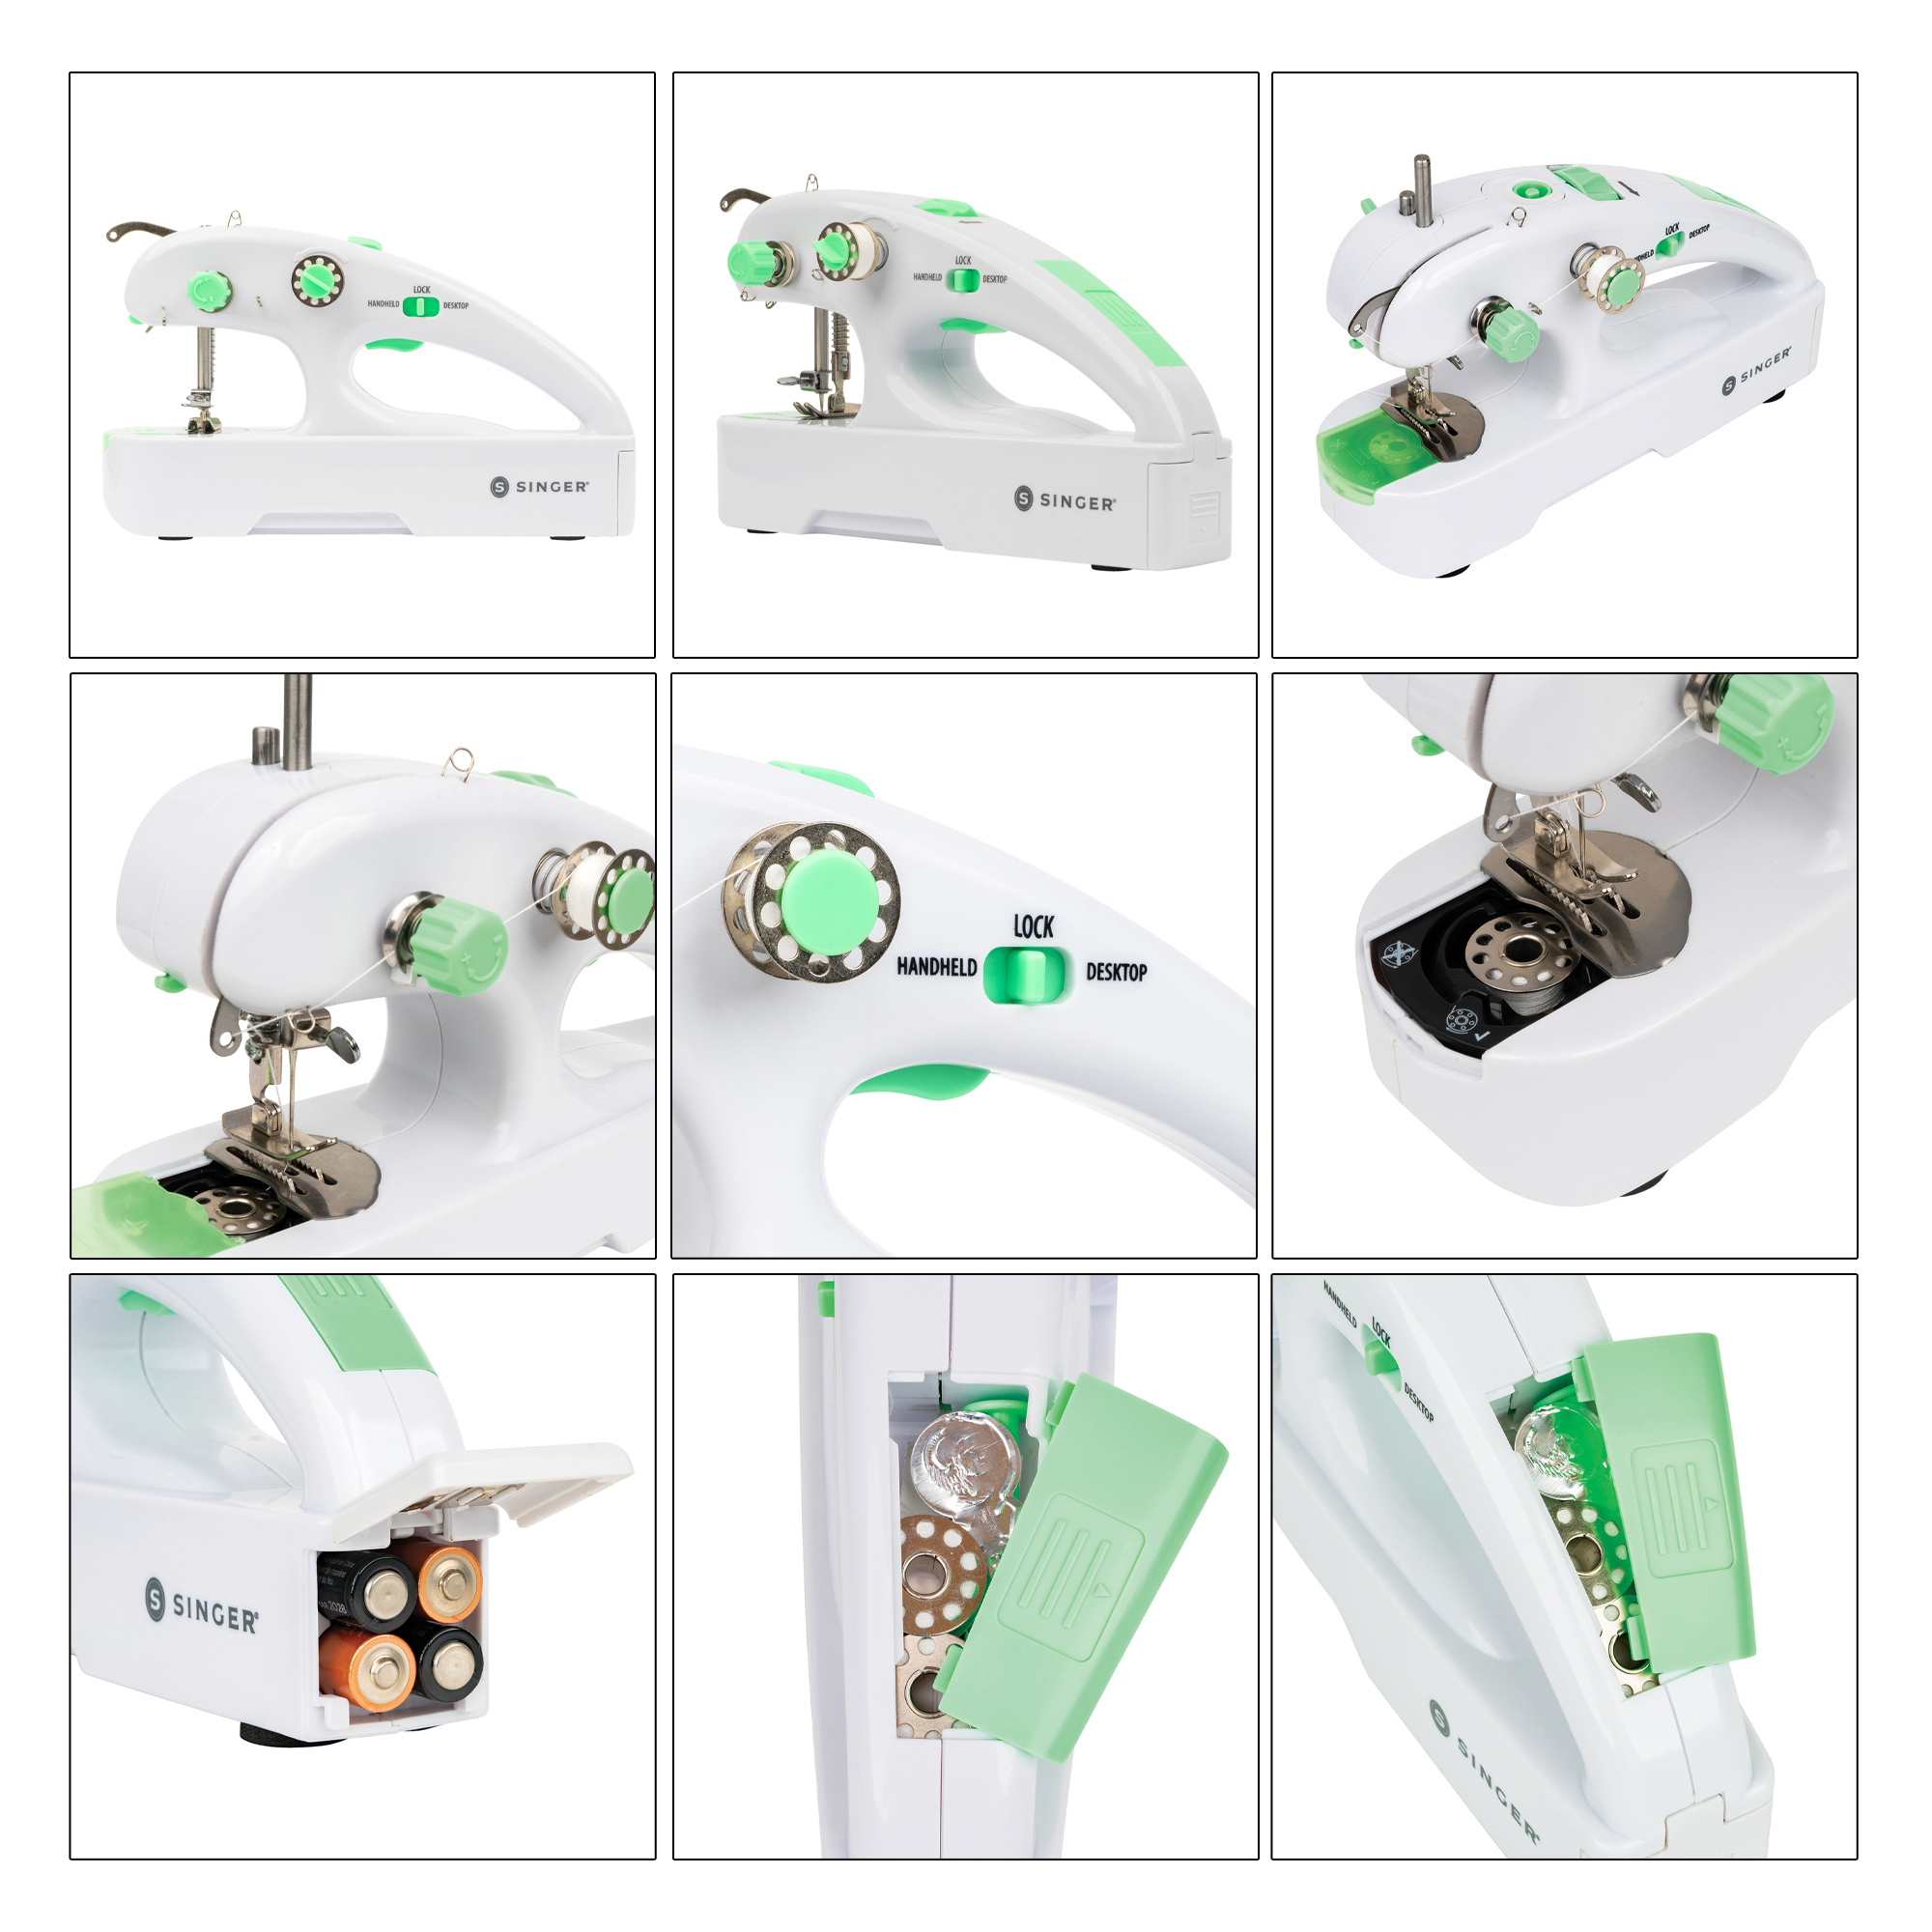 SINGER Stitch Quick Plus Cordless Hand Held Mending Portable Sewing Machine, Two Thread - image 12 of 14